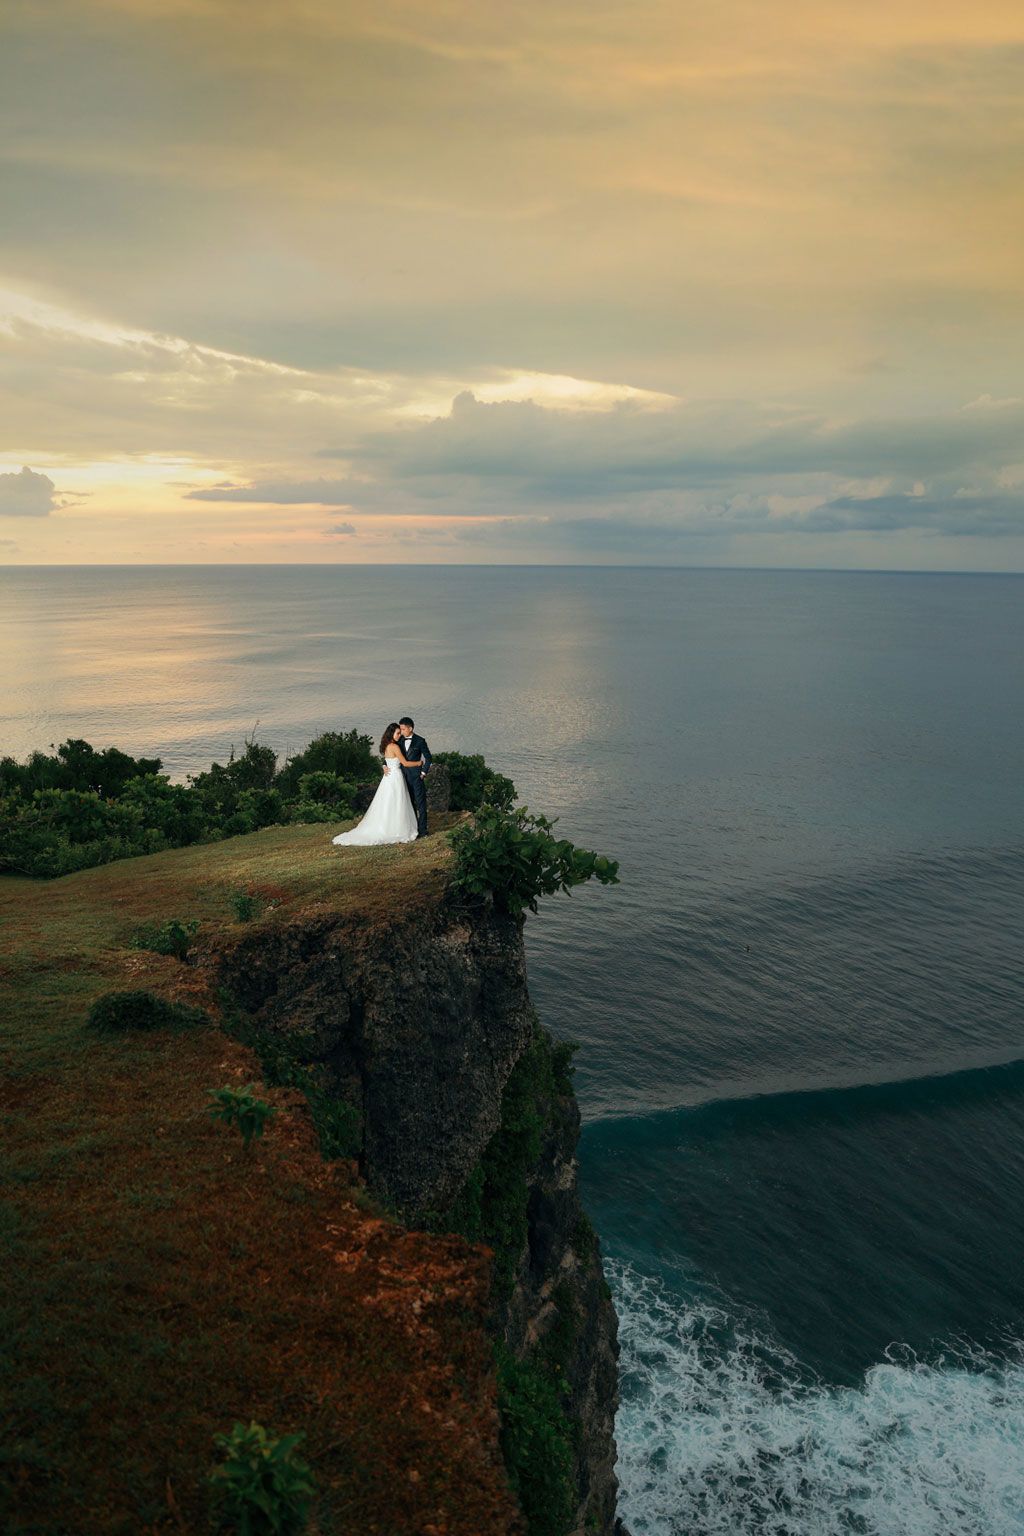 Wedding Photoshoot in Bali, Indonesia for  Donny & Rachel from Singapore - OneThreeOneFour